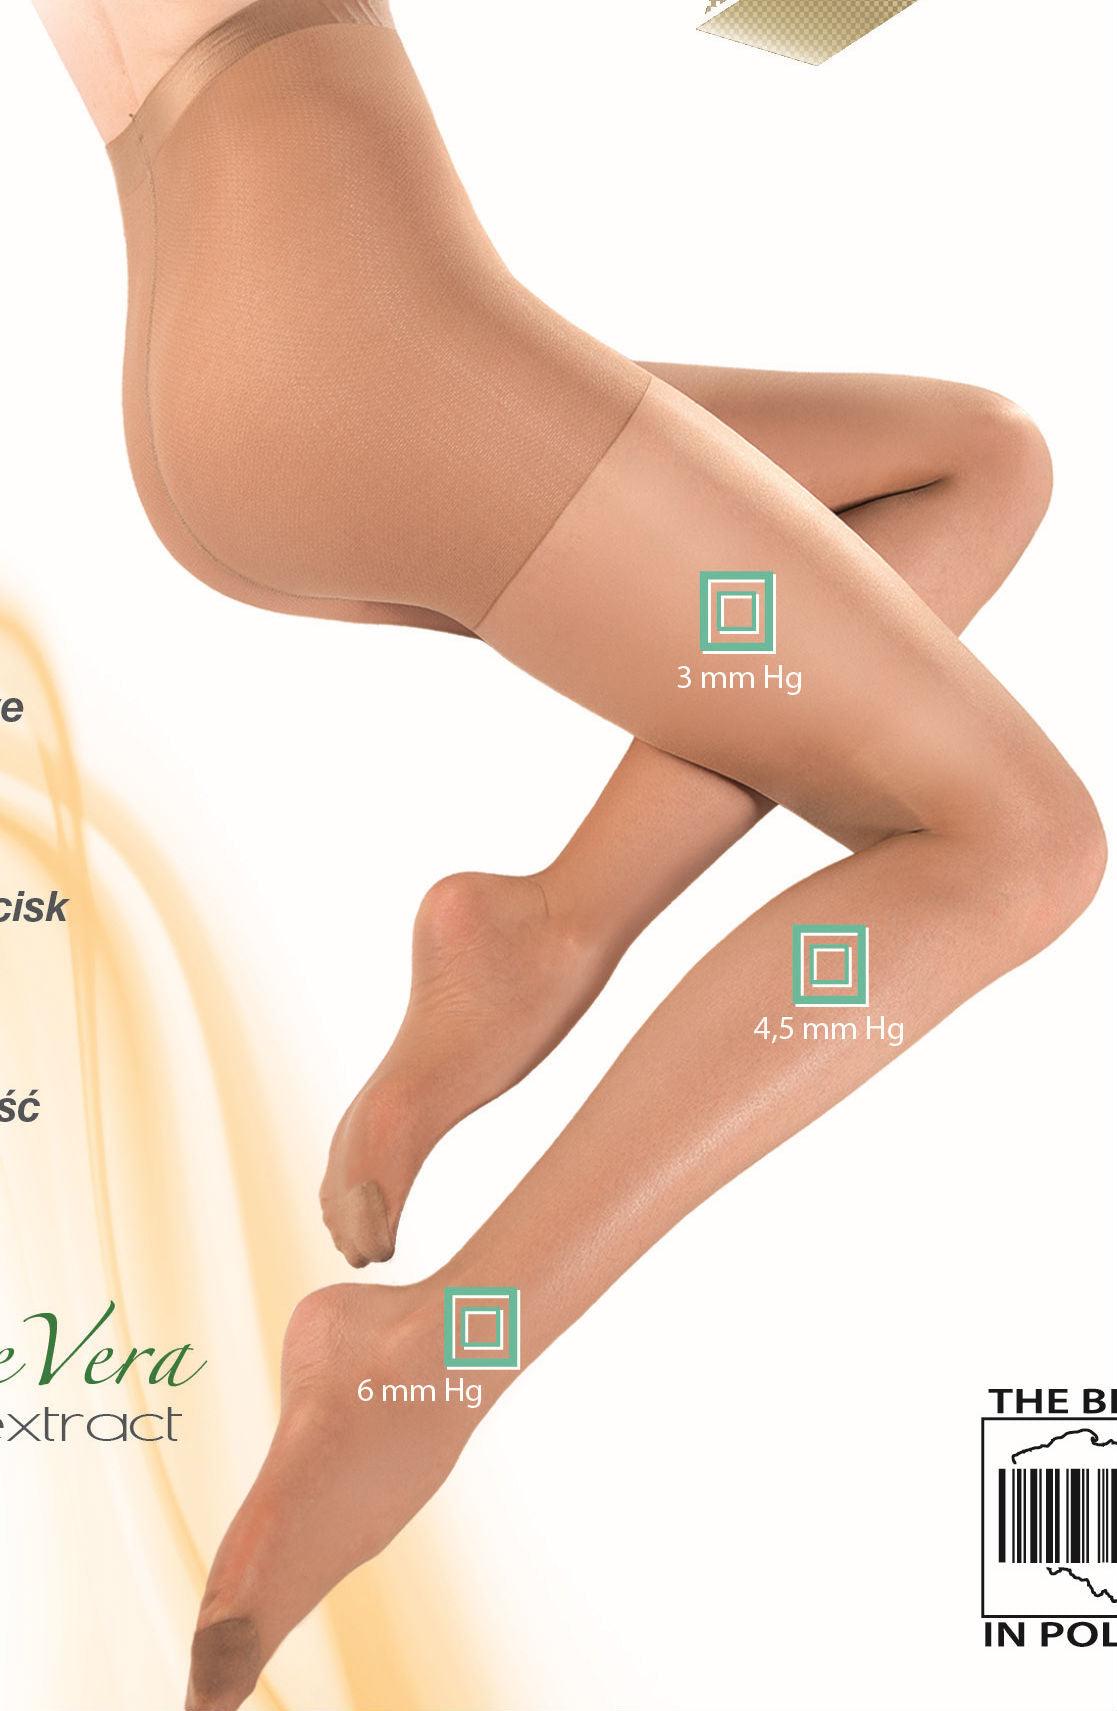 Classic Medica Relax 20 Tights - Sydney Rose Lingerie 